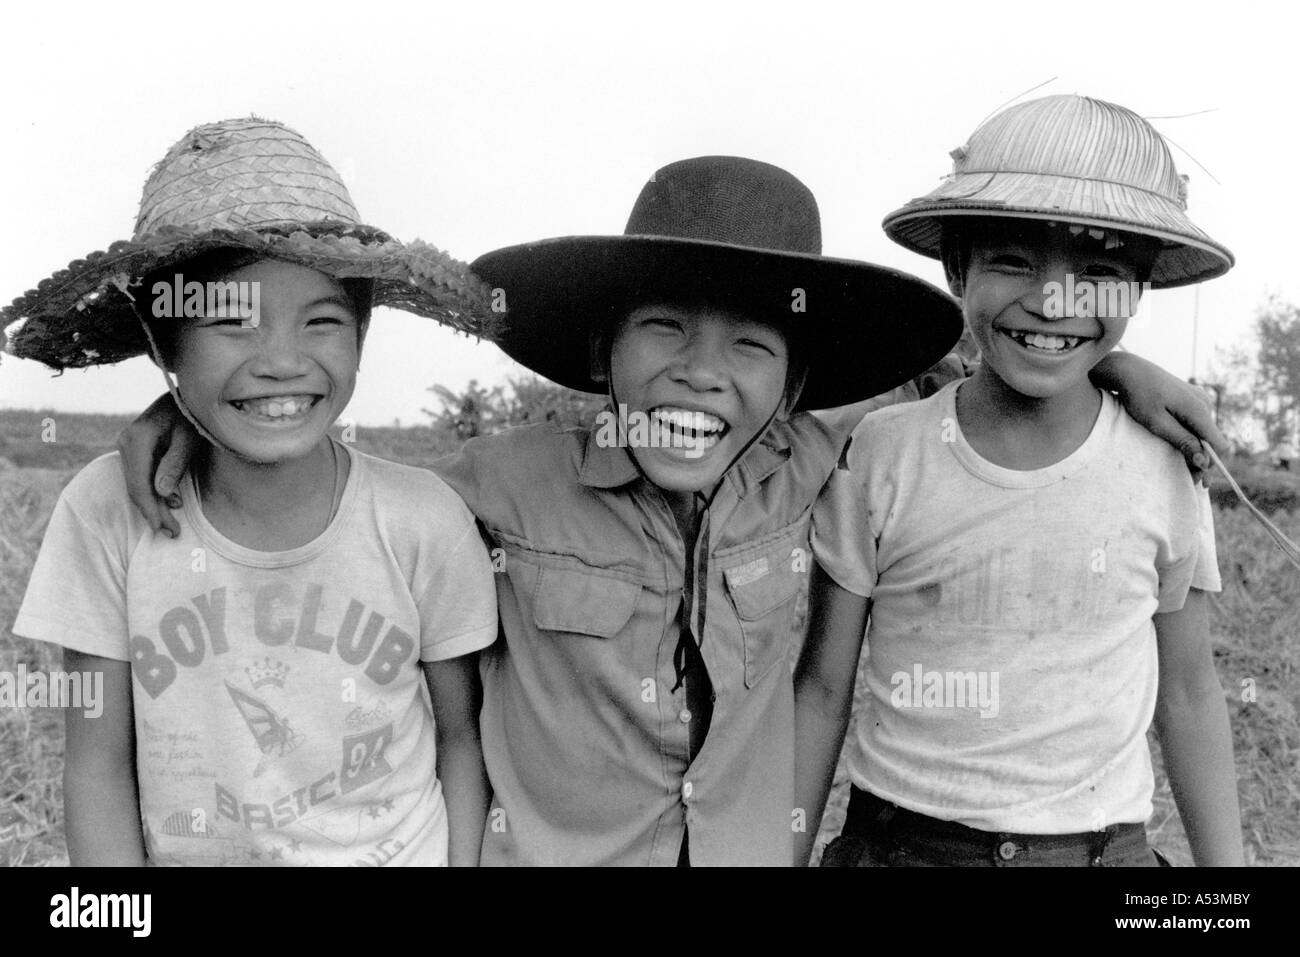 Painet ha1394 208 black and white children boys nam ha vietnam country developing nation less economically developed culture Stock Photo